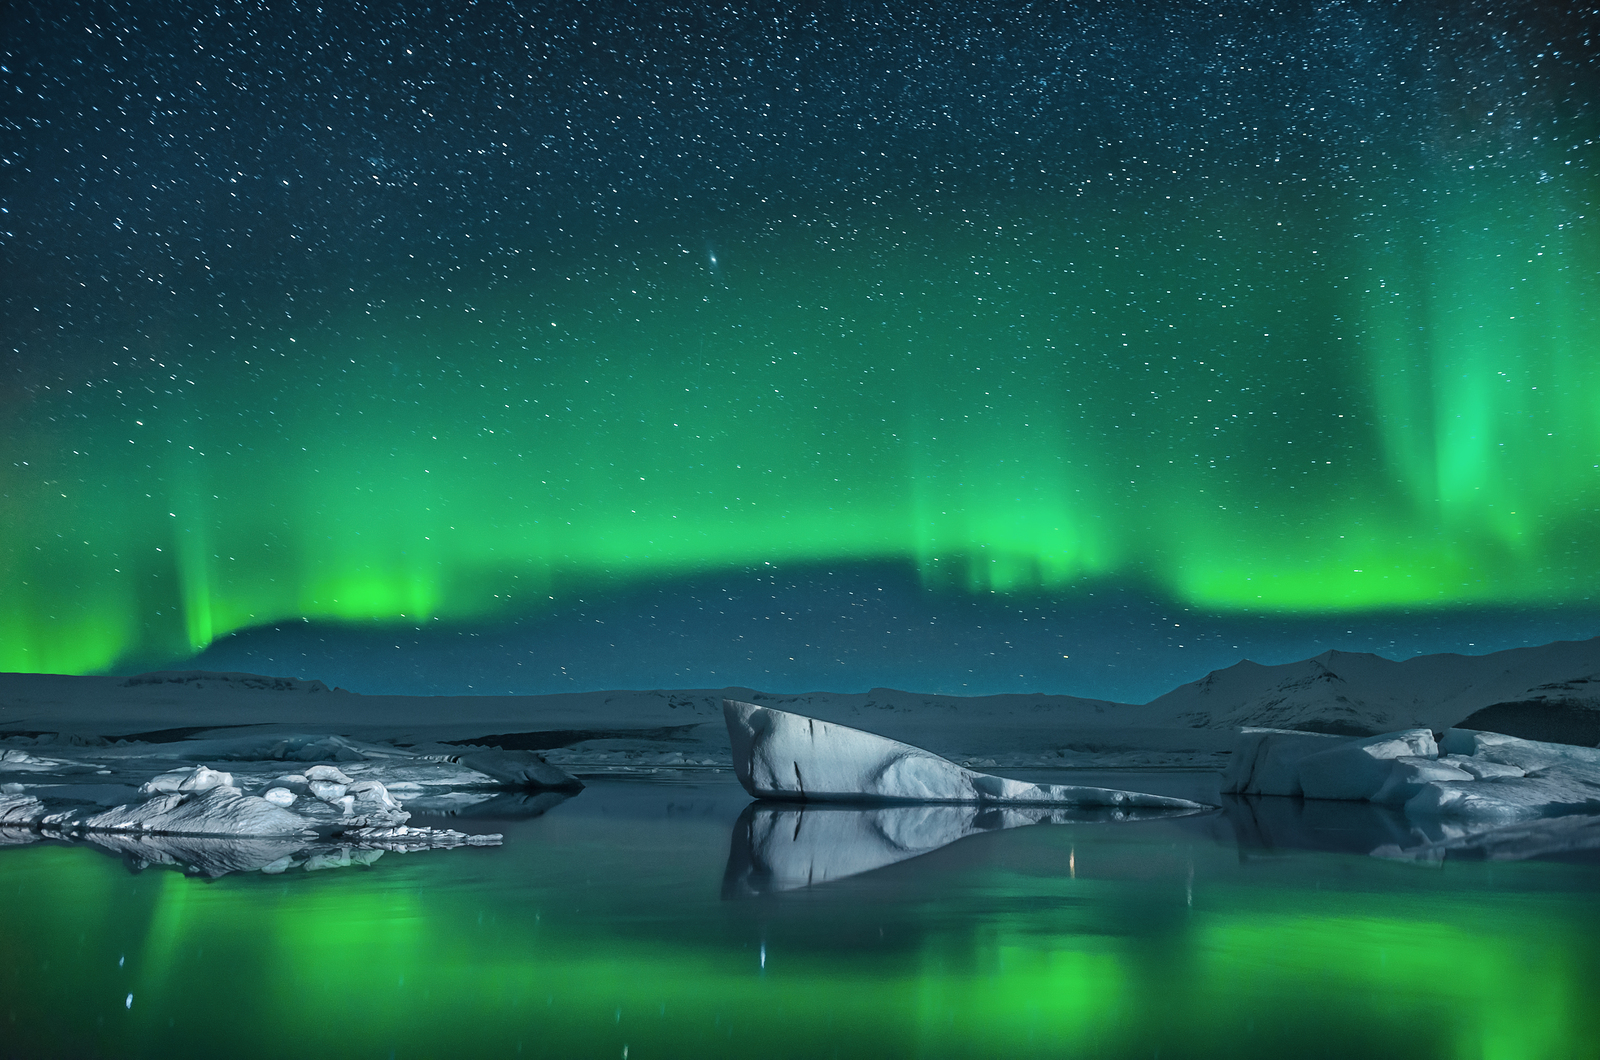 a green lights in the sky over water